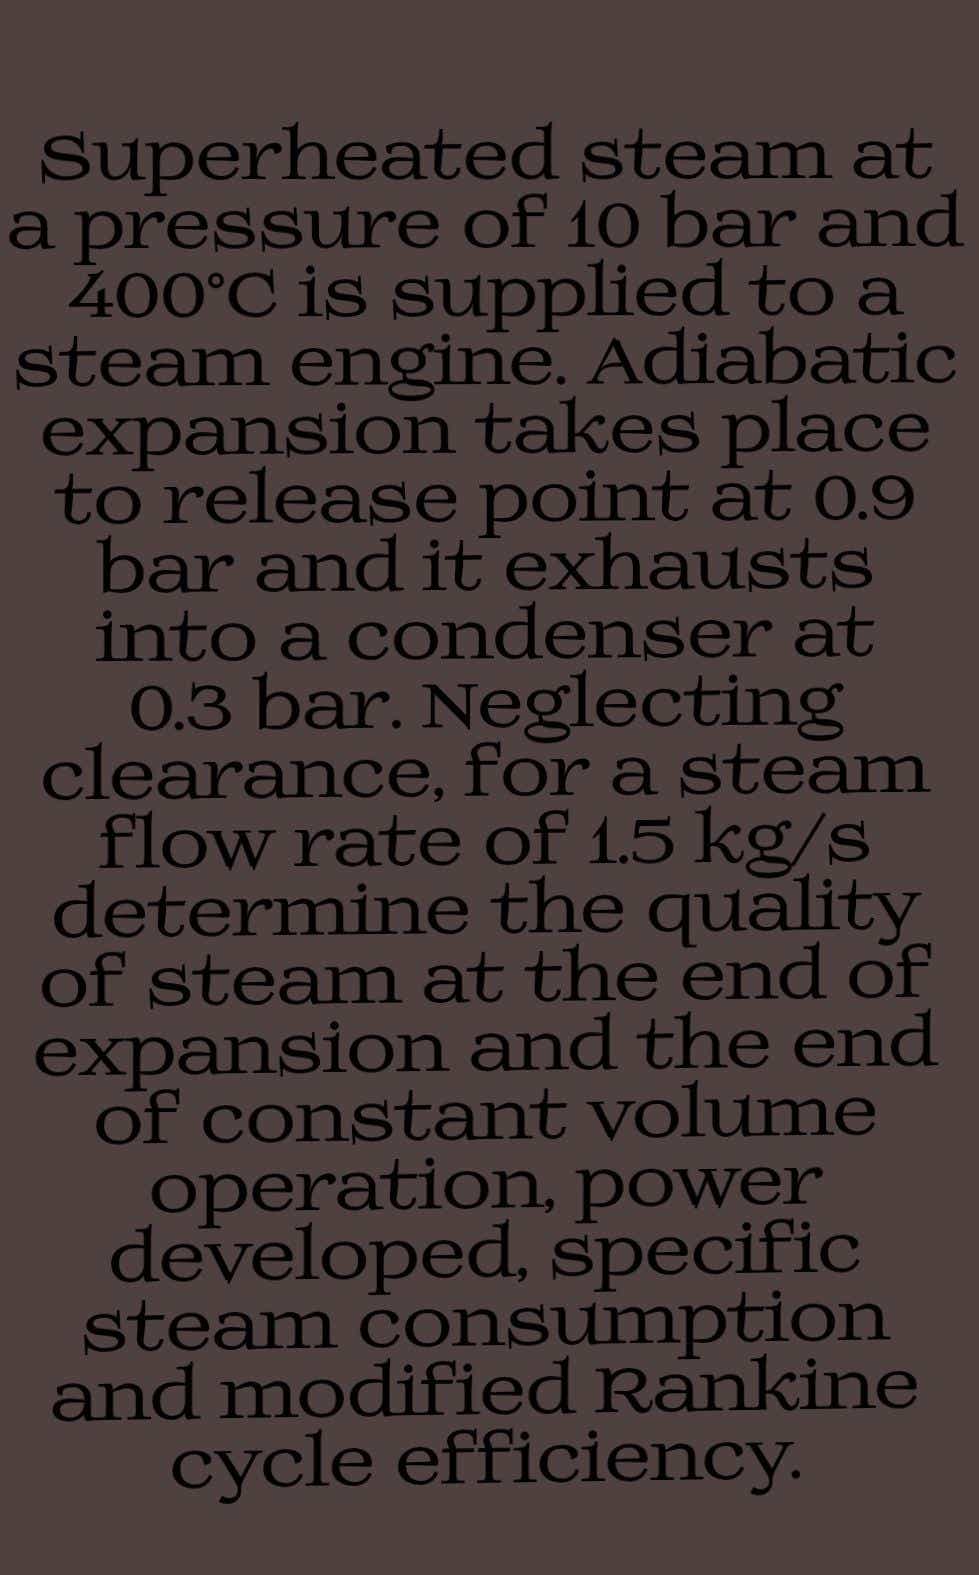 Superheated steam at
a pressure of 10 bar and
400°C is supplied to a
steam engine. Adiabatic
expansion takes place
to release point at 0.9
bar and it exhausts
into a condenser at
0.3 bar. Neglecting
clearance, for a steam
flow rate of 1.5 kg/s
determine the quality
of steam at the end of
expansion and the end
of constant volume
operation, power
developed, specific
steam consumption
and modified Rankine
cycle efficiency.
